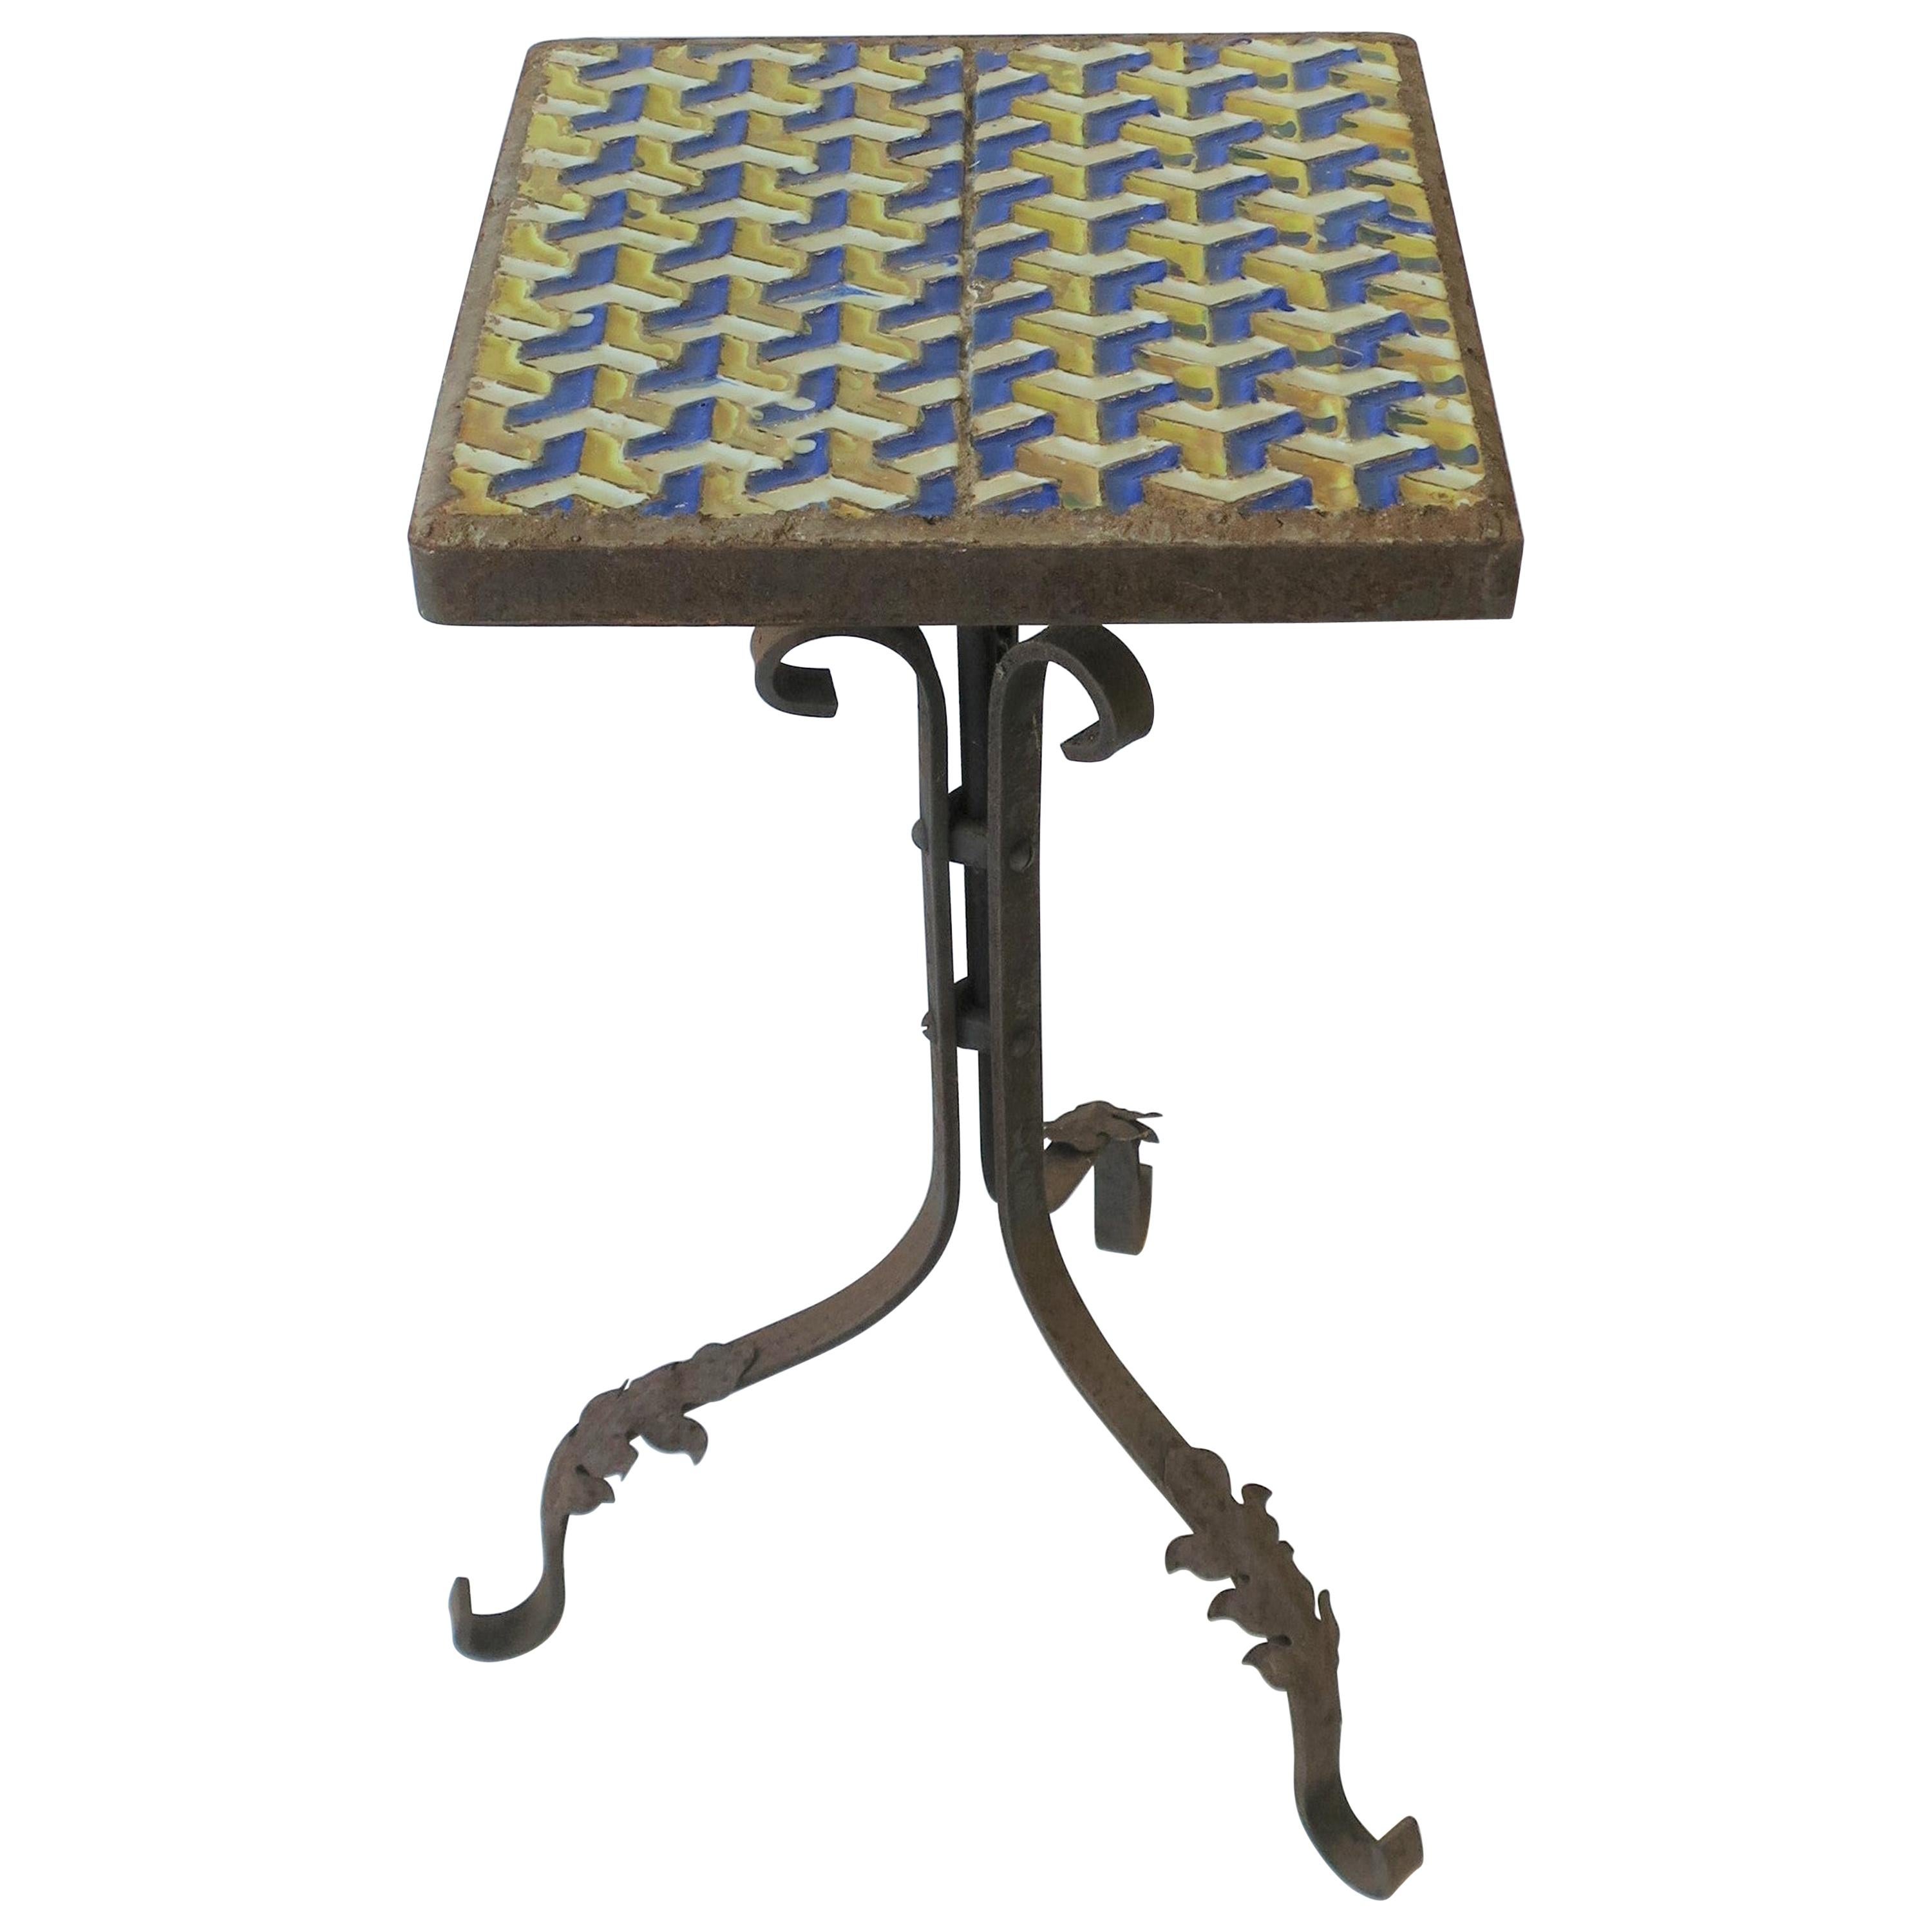 Midcentury Outdoor Patio Side Table with Geometric Ceramic Top